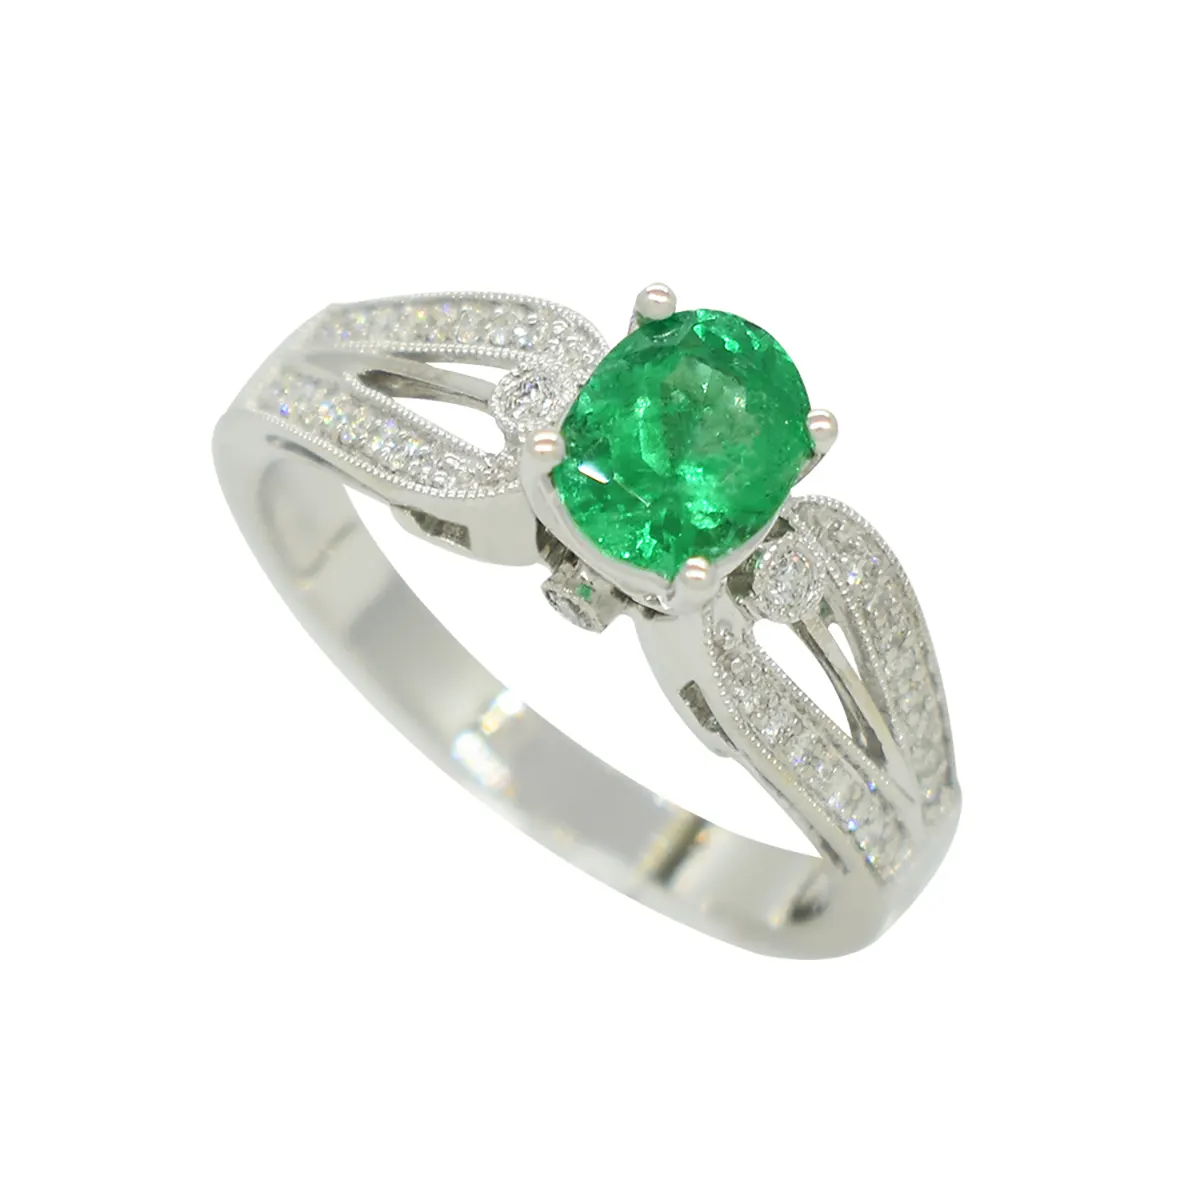 emerald-ring-in-white-gold-with-diamond-accents-in-micro-pave